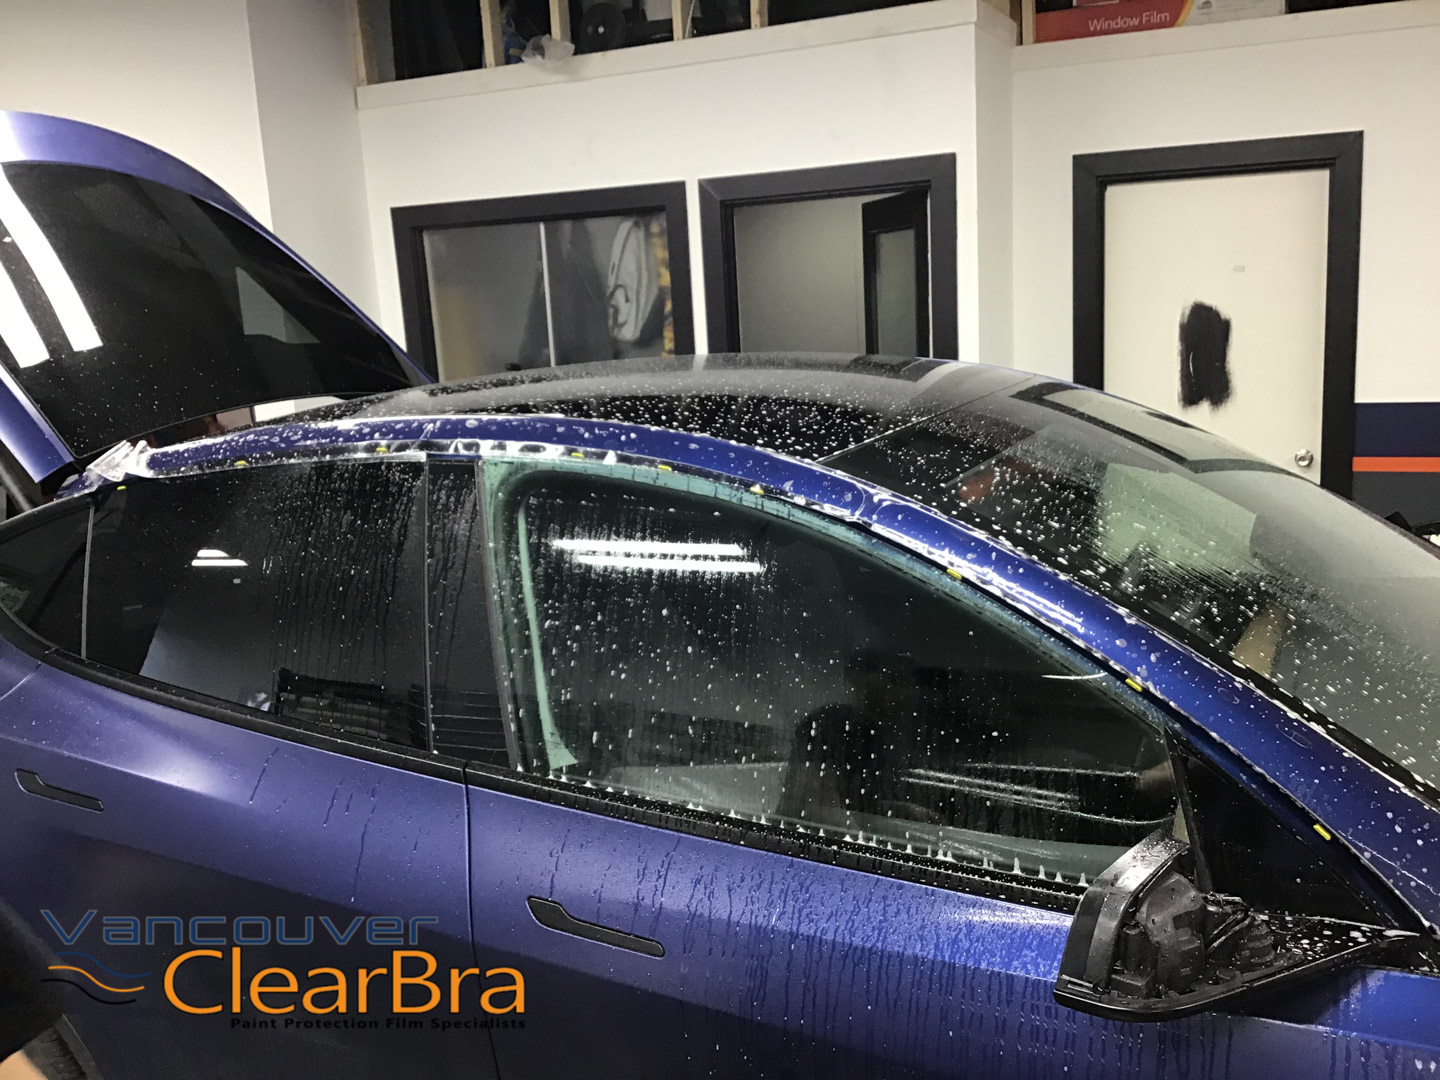 xpel-ultimate-xpel-stealth-clear-bra-paint-protection-film-Vancouver-ClearBra-2174.jpg